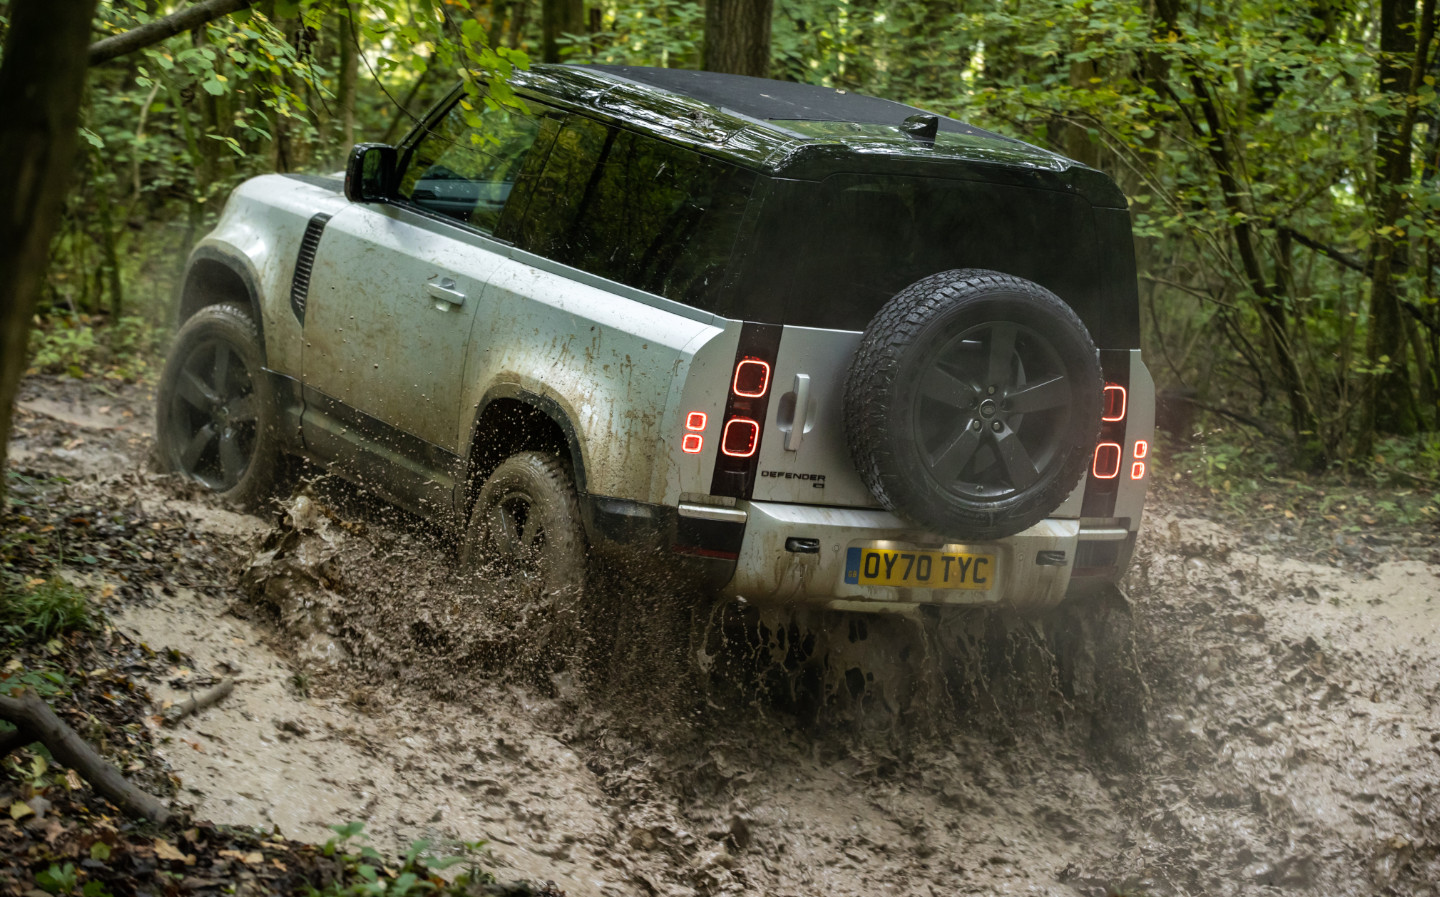 Jeremy Clarkson tests out the Land Rover Defender on his farm